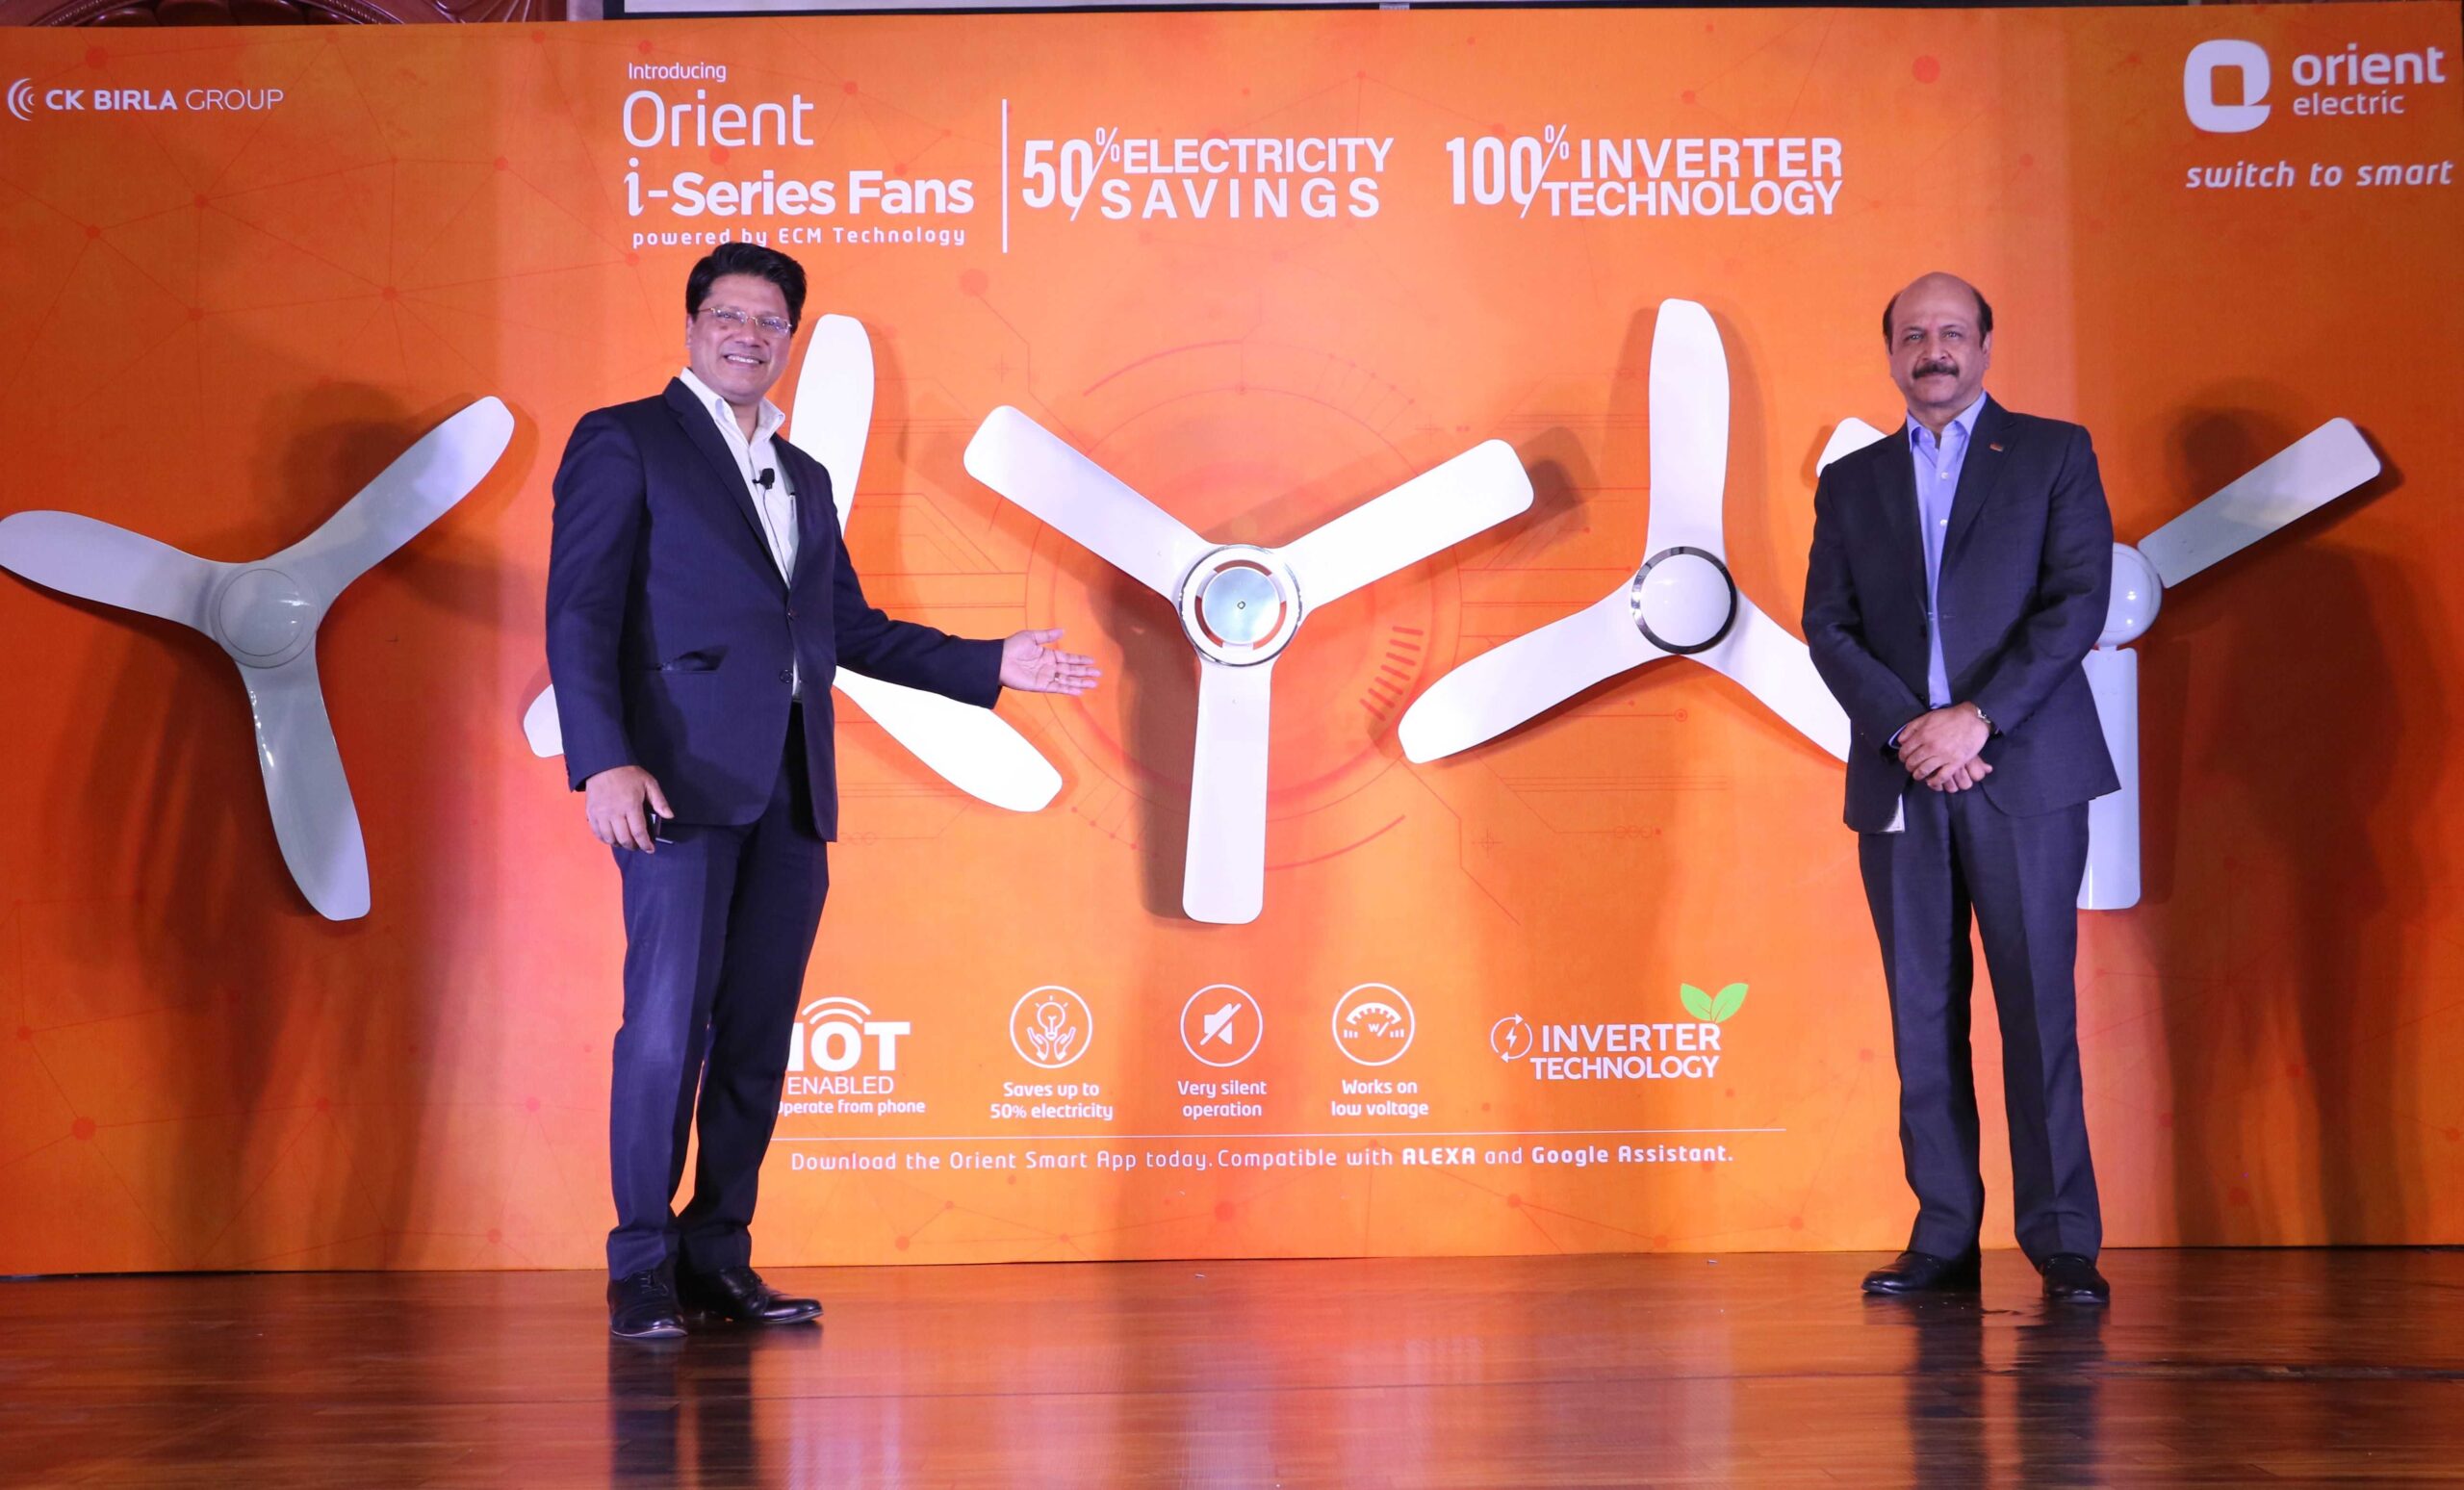 Orient Electric launches energy saving and IoT-enabled inverter i-Series fans